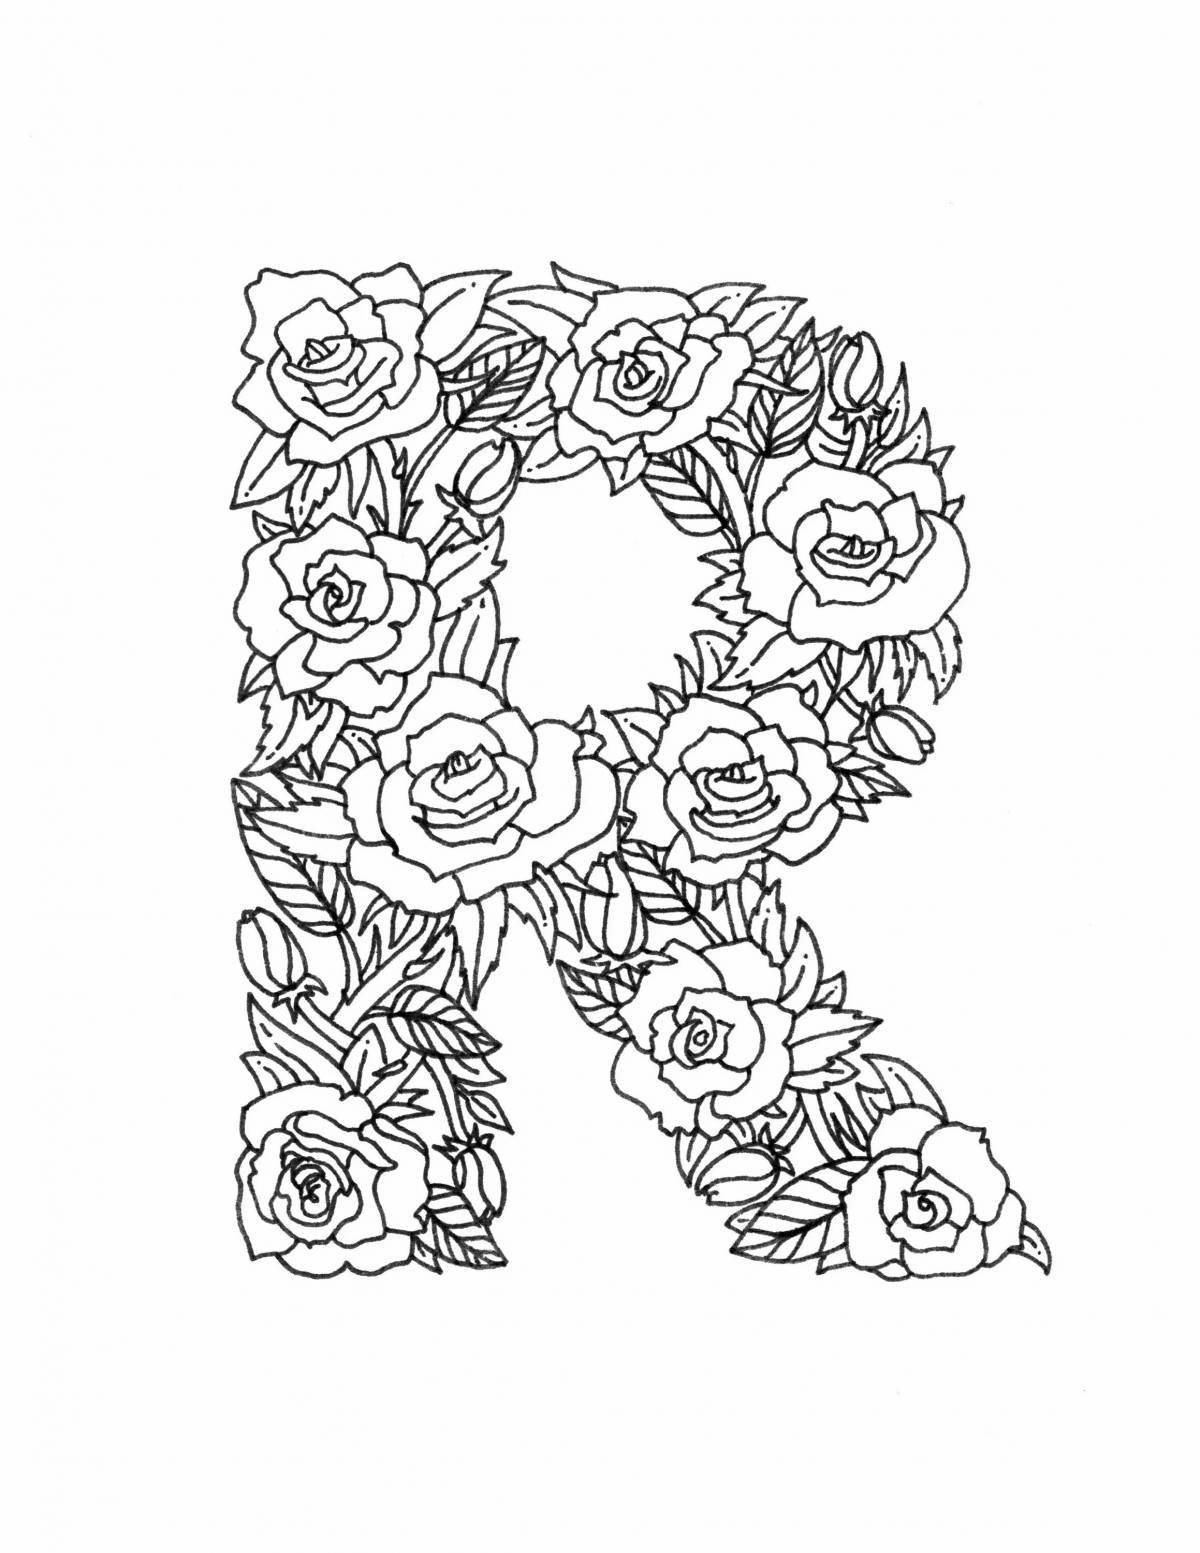 Colorful letter c with flowers